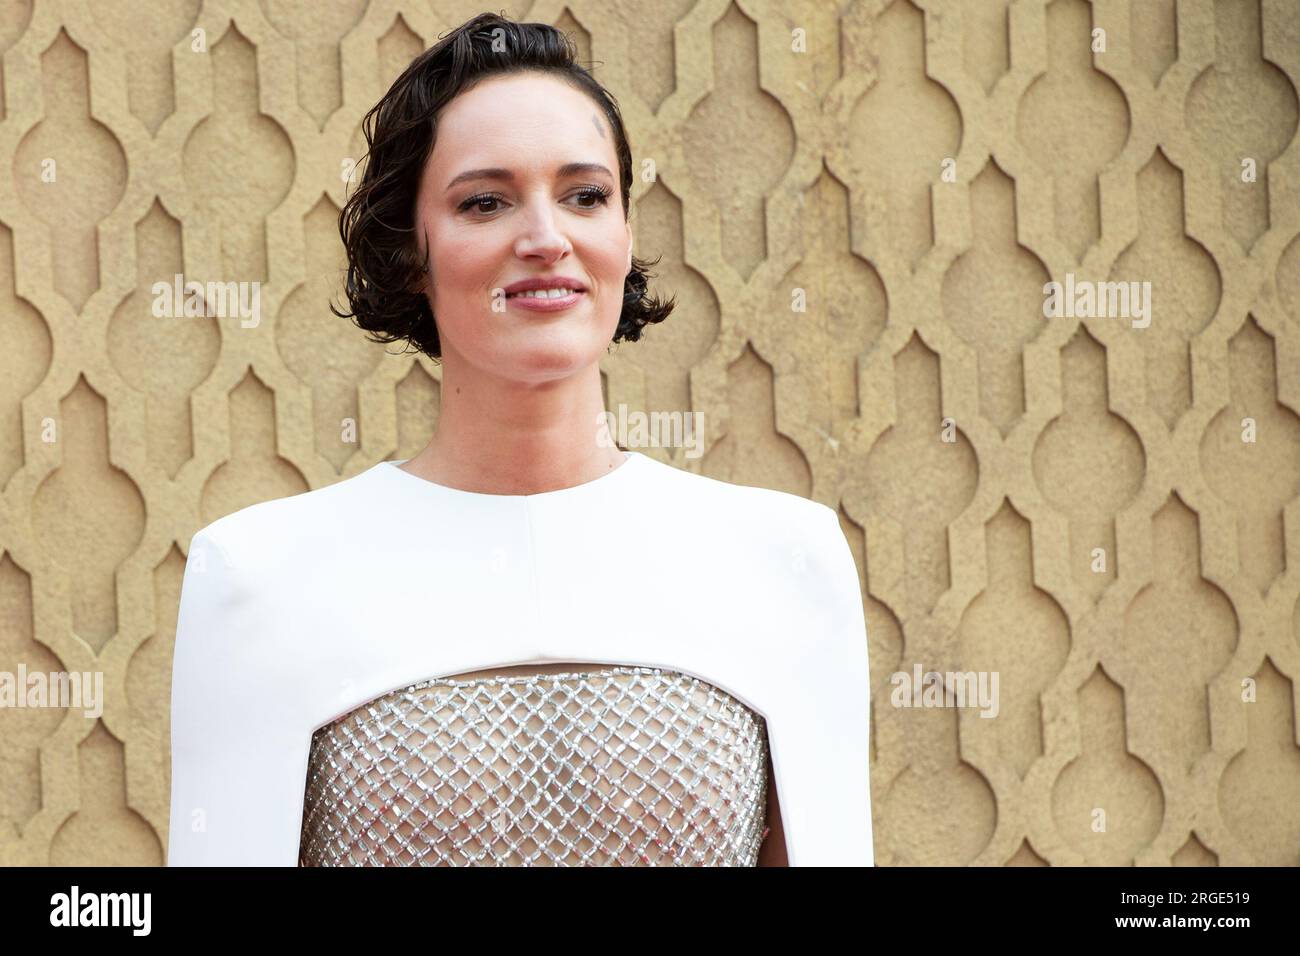 Phoebe Waller-Bridge attends the UK Premiere of 'Indiana Jones and The Dial of Destiny' at Cineworld, Leicester Square, London, England, UK on Monday Stock Photo